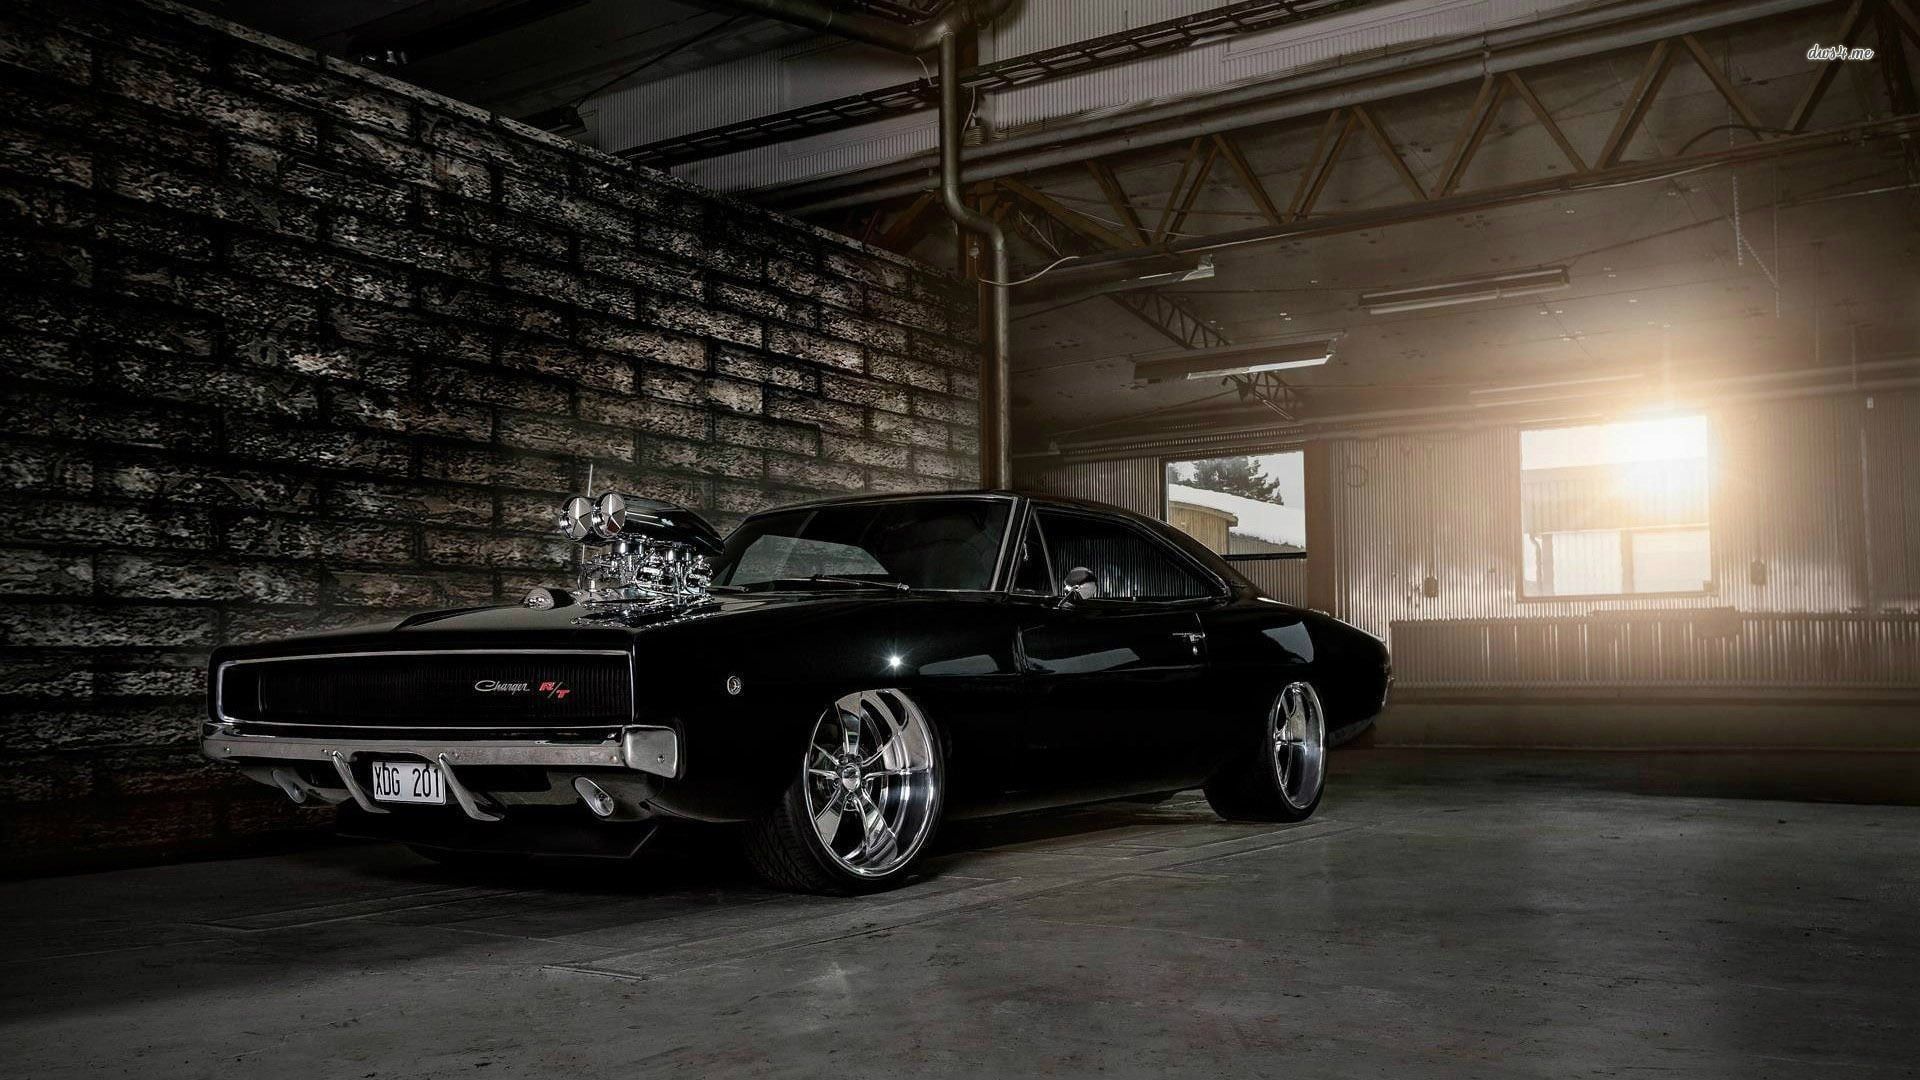 Black Muscle Car Fast And Furious Dodge Charger #car Muscle Cars 1969 Dodge Charger R T 1968 Dodge Charger In 2020. Dodge Charger, Dodge Charger Classic Cars Muscle